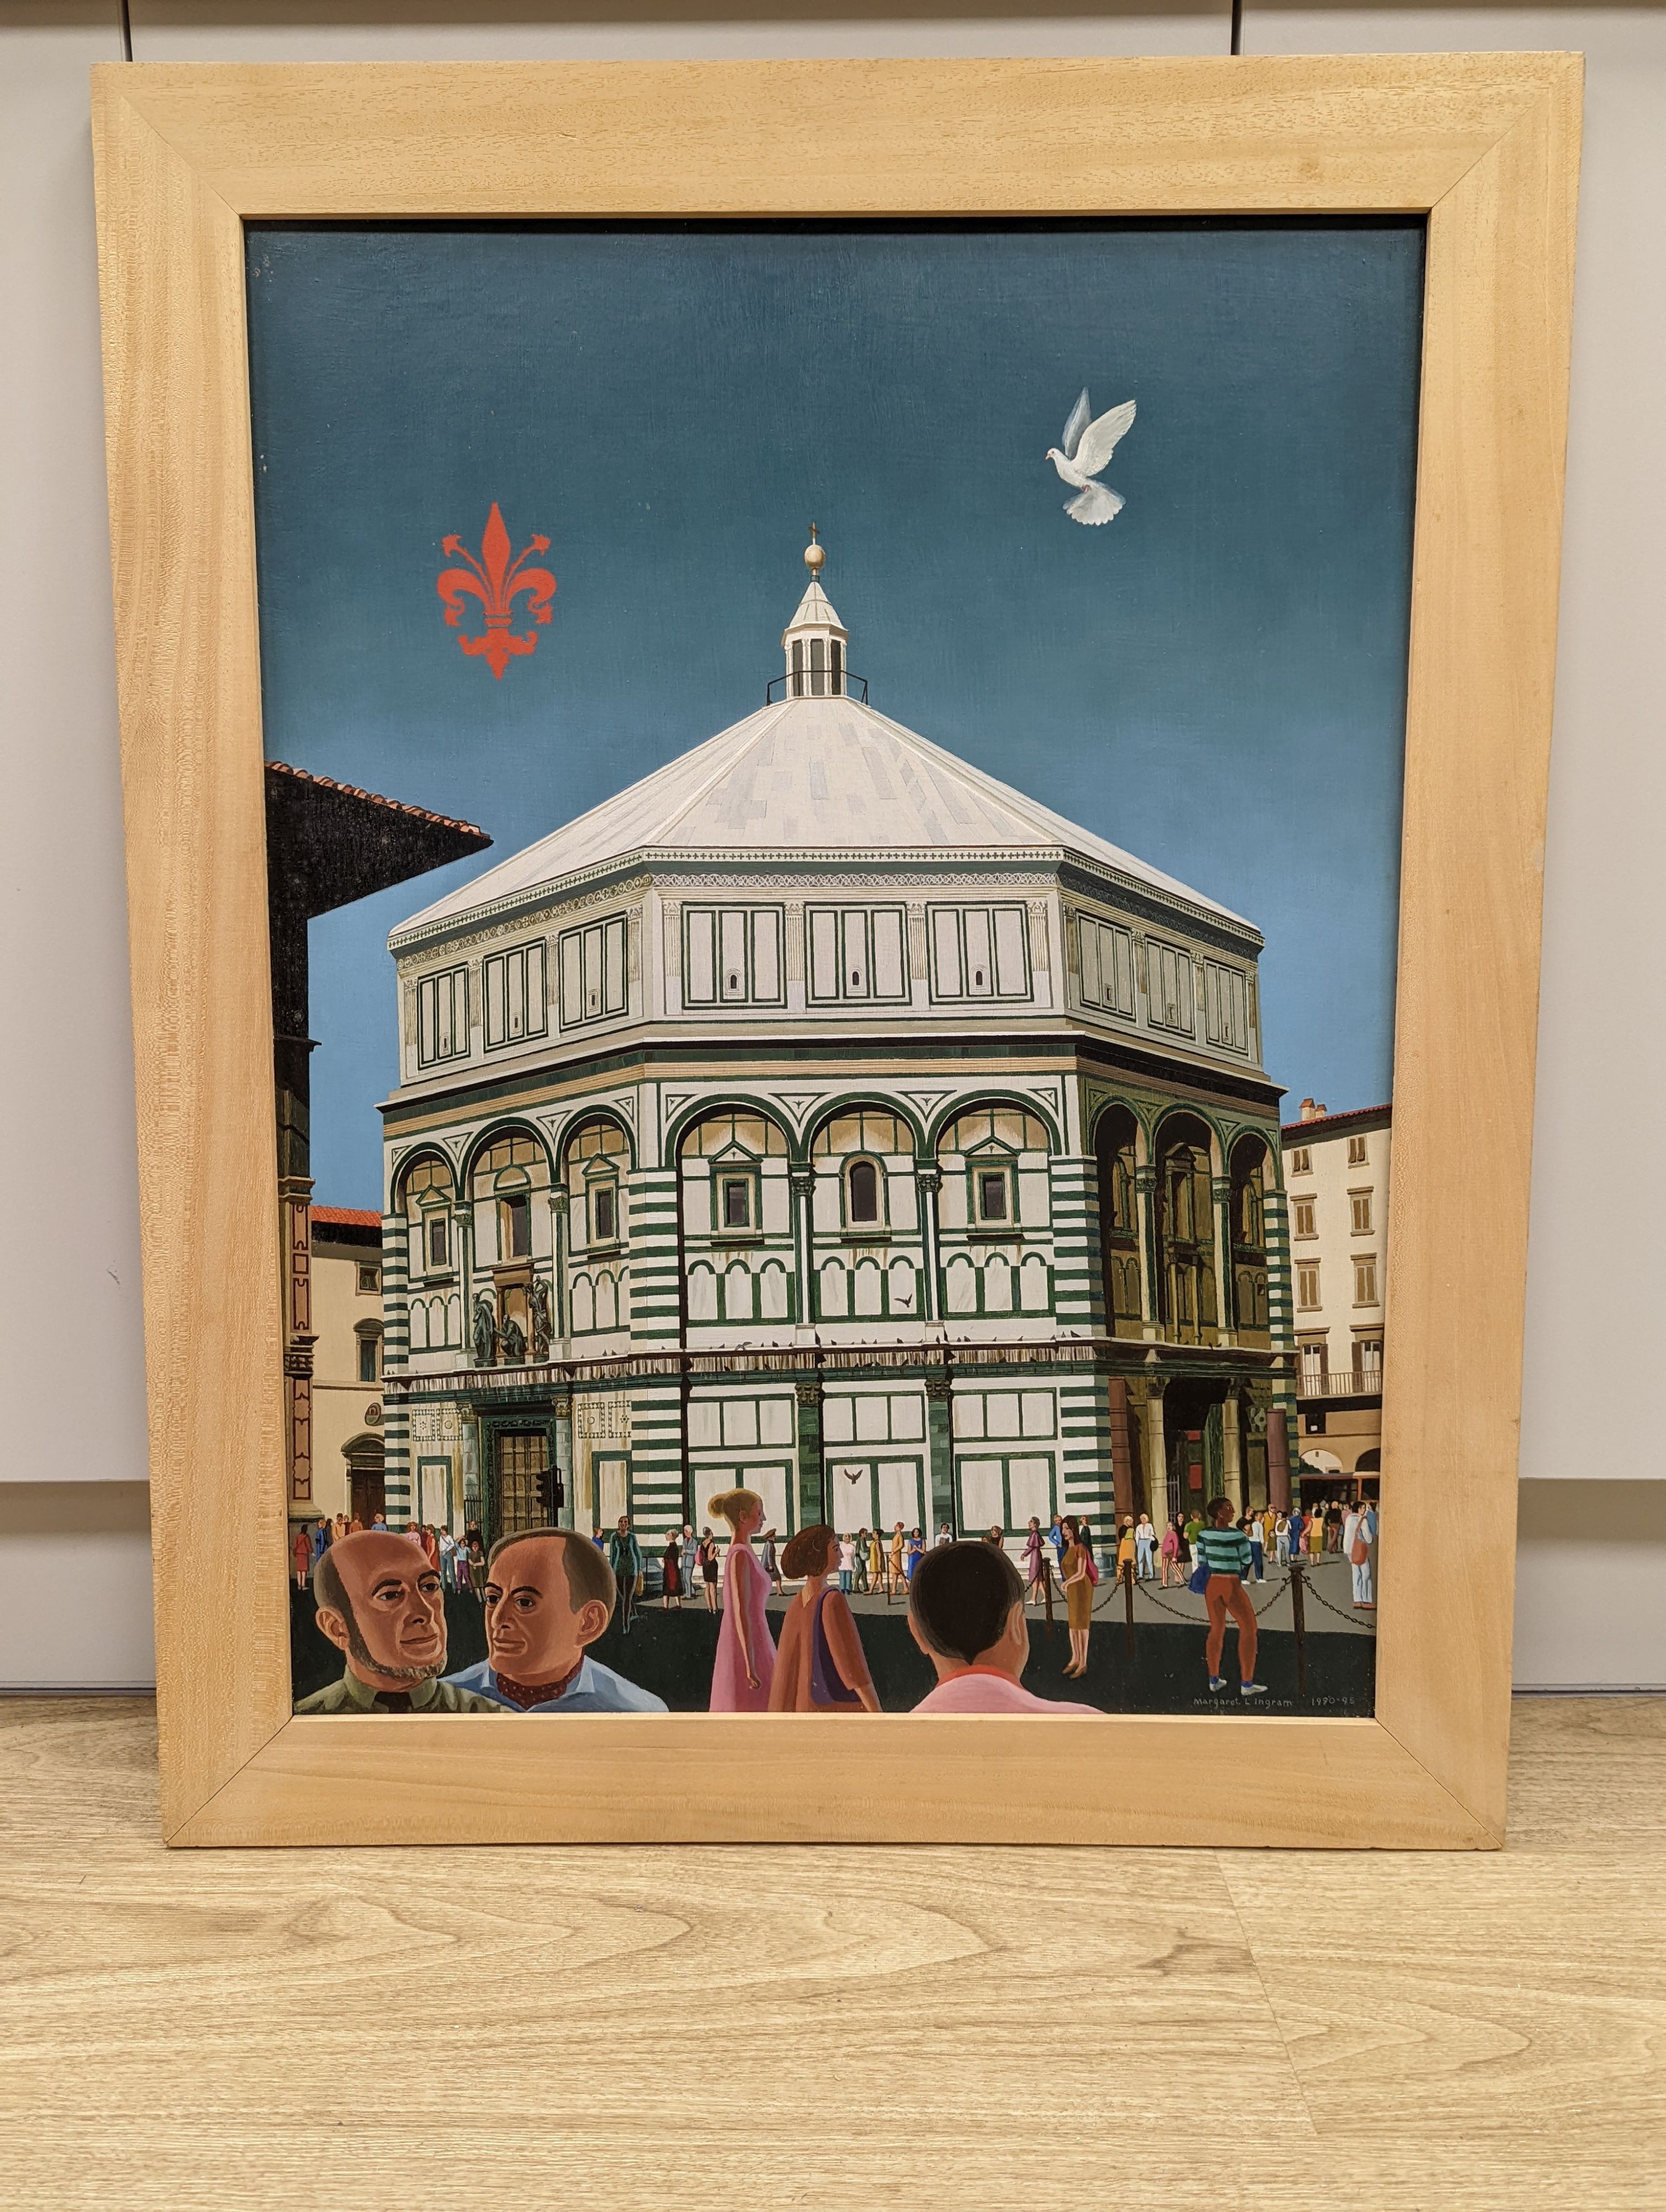 Margaret Ingram (1930-), oil on board, Ronald Miller and Robert Erich Wolf in front of The Baptistry Florence, Italy, signed and dated 1990-95, 70 x 53.5cm